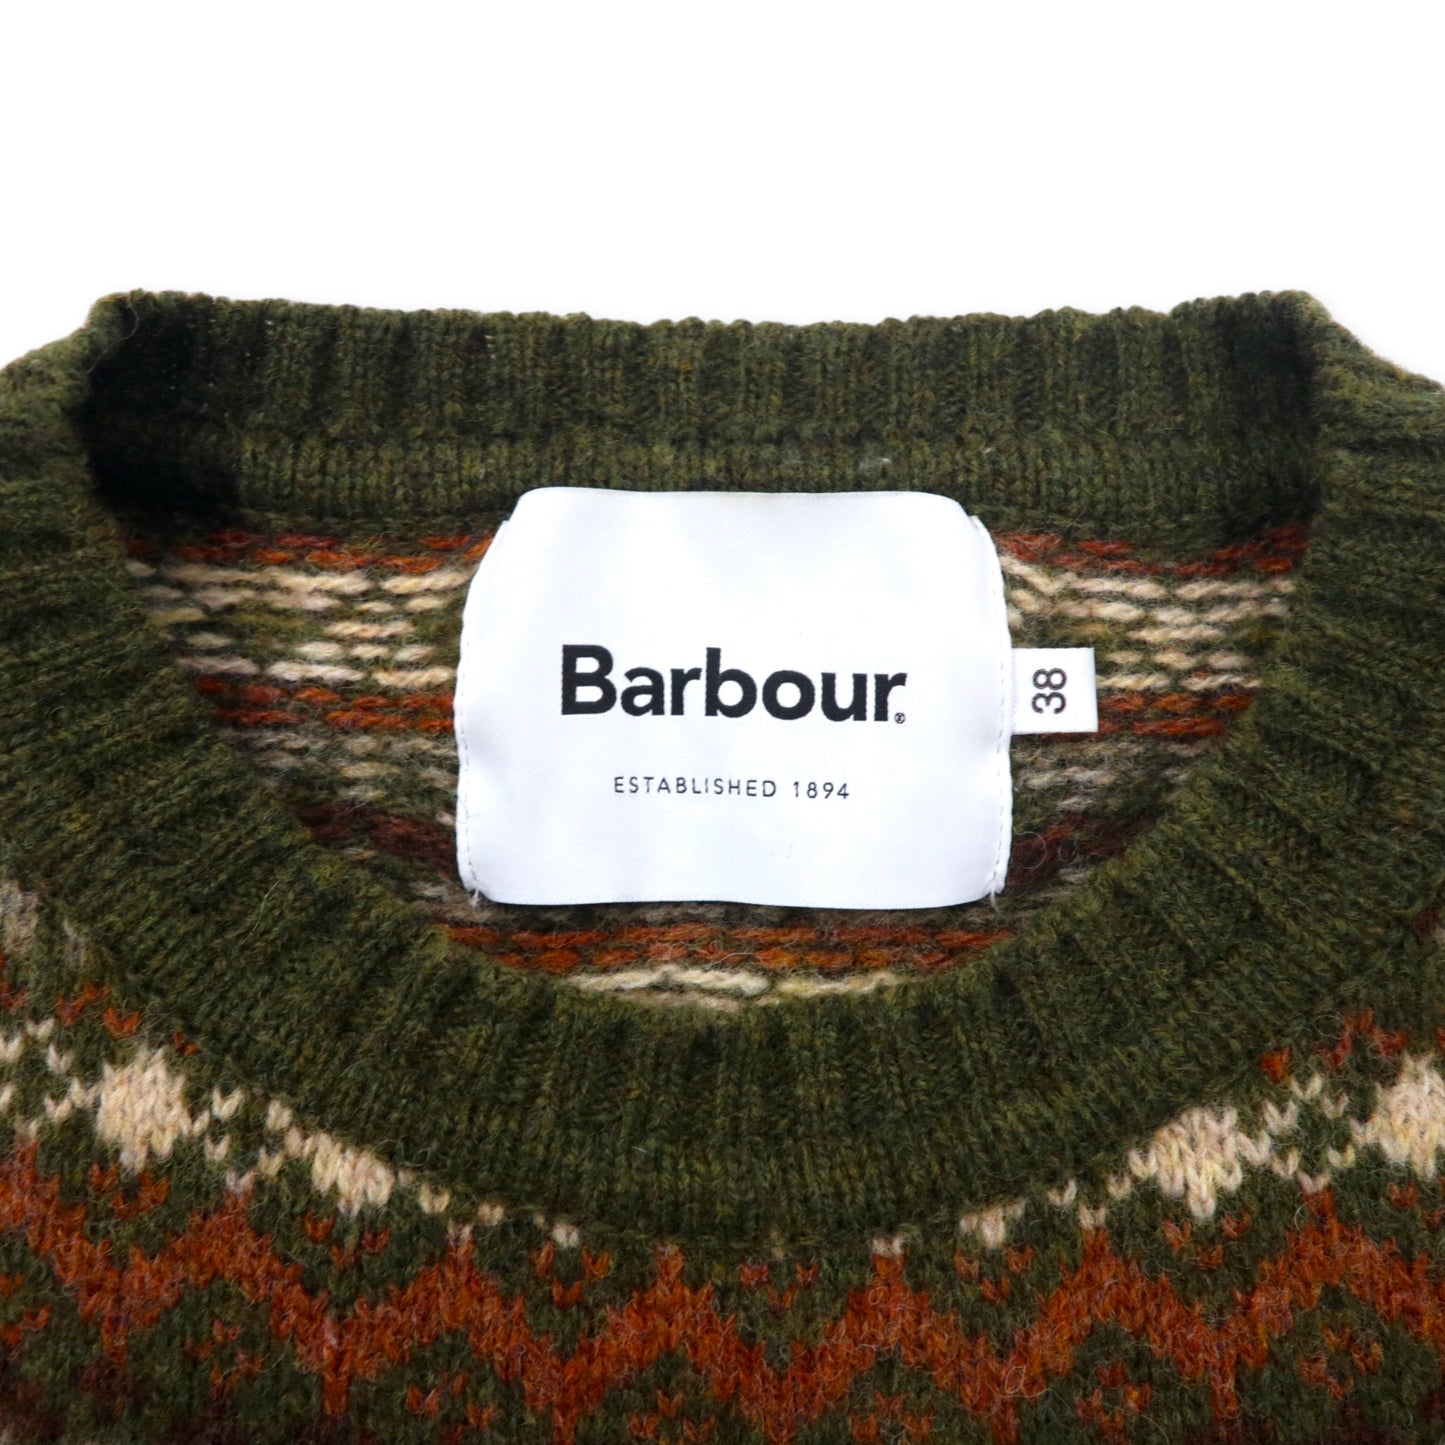 BARBOUR UK MADE CREWNECK Knit Sweater 38 Brown Patterned Striped 